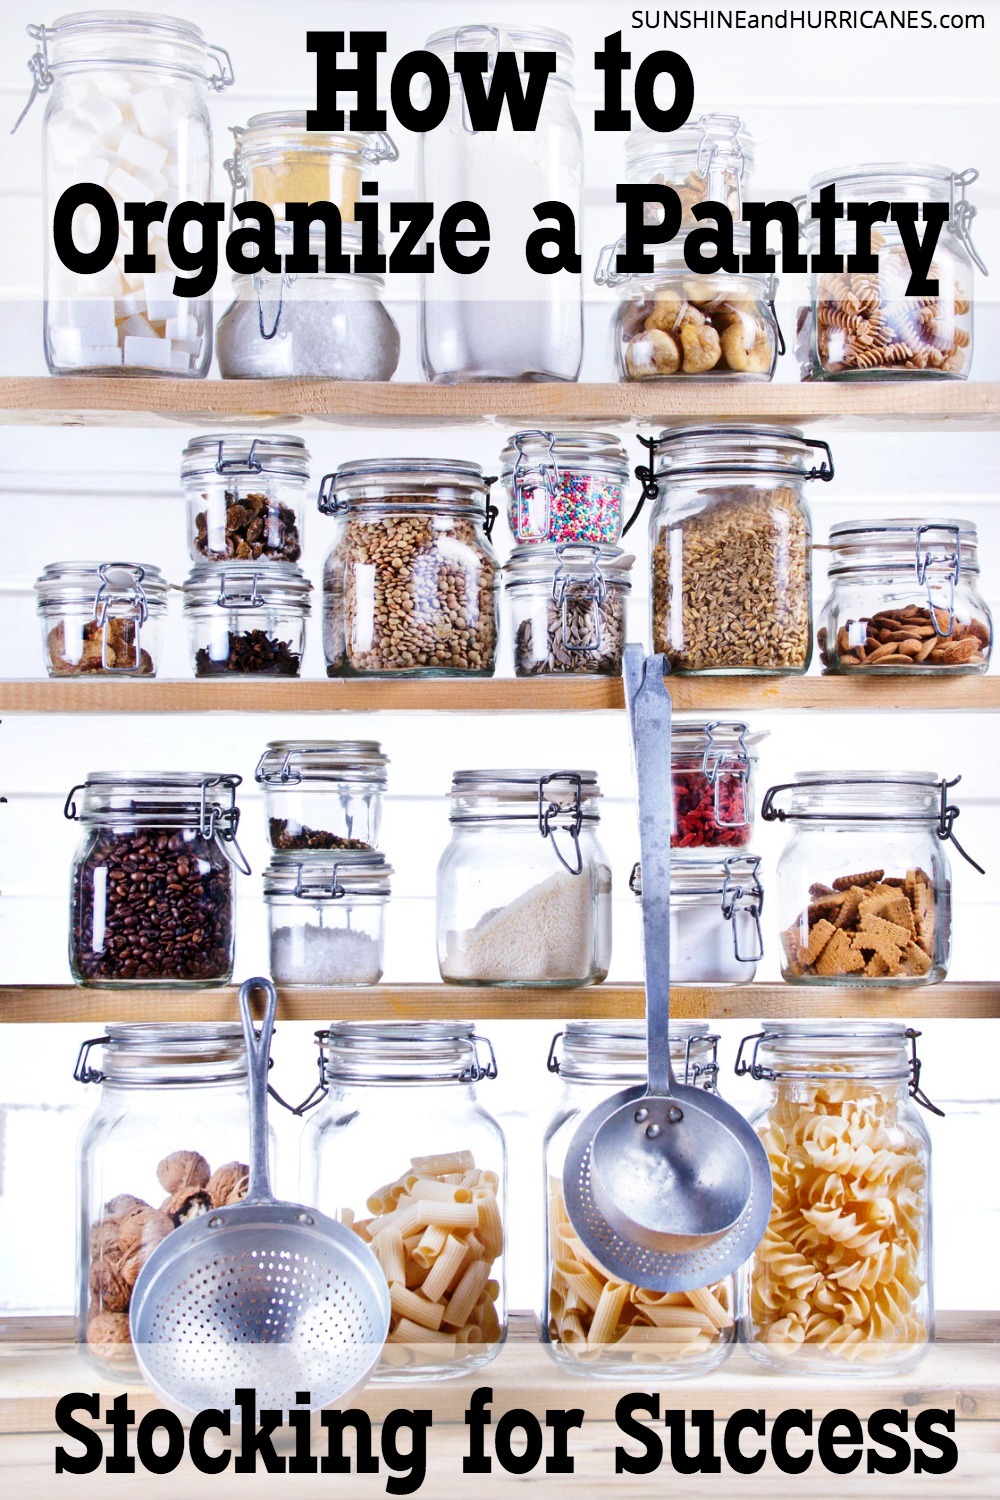 We don't have to be great planners or even all that organized to set up a pantry that is stocked for success. I like to consider this a practice guide for how to organize a pantry. It sets you up so on those weeks when things are hectic and maybe meal planning just isn't happening (or maybe you're just not a meal planner) this system will still make it easy to find what your looking for and get meals on the table quickly and stress-free. How to Organize a Pantry at SunshineandHurricanes.com